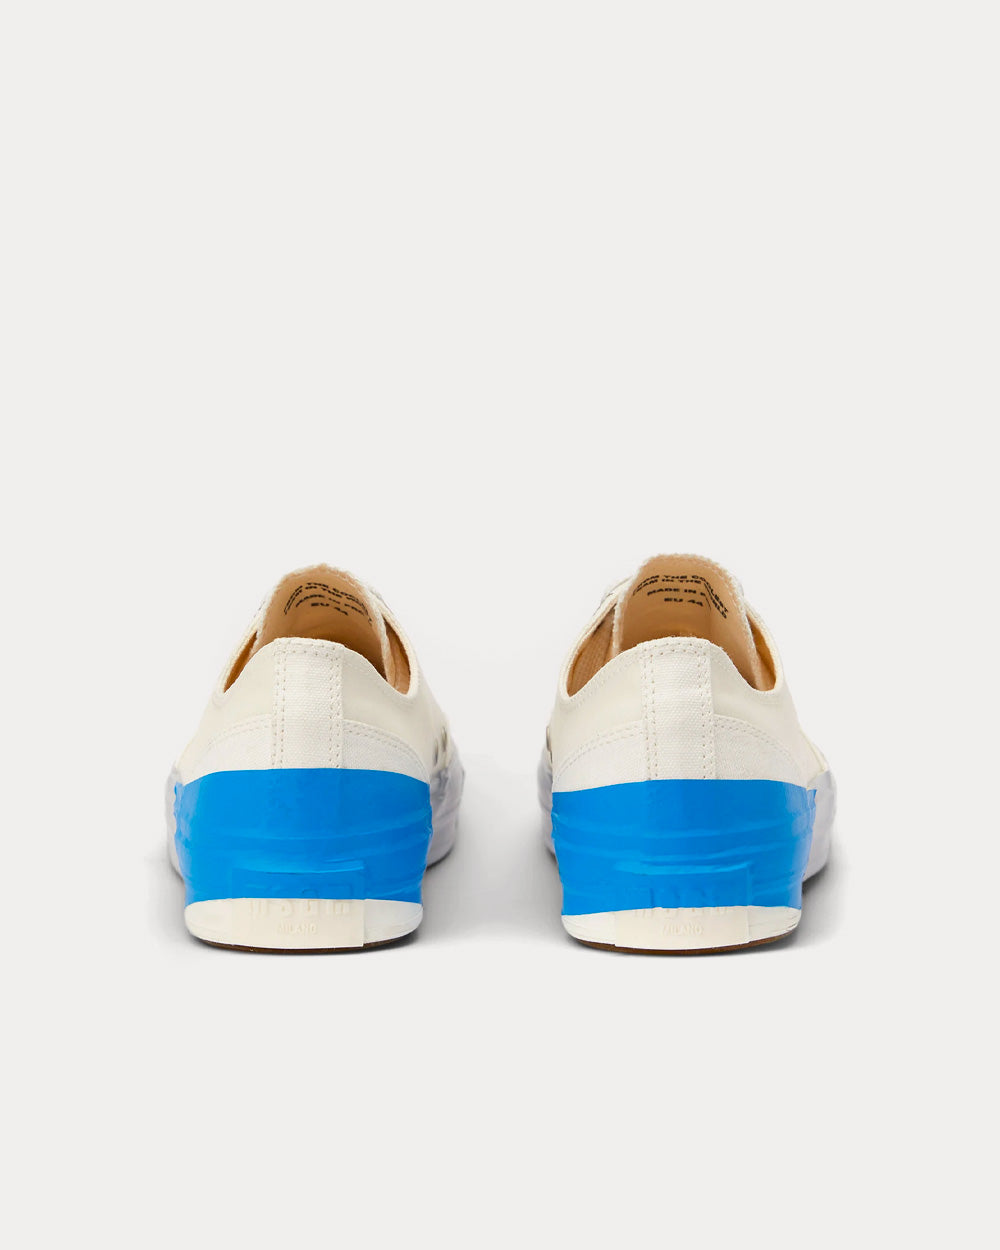 MSGM - Tape Appliqued Vulcanized Canvas White / Blue Low Top Sneakers